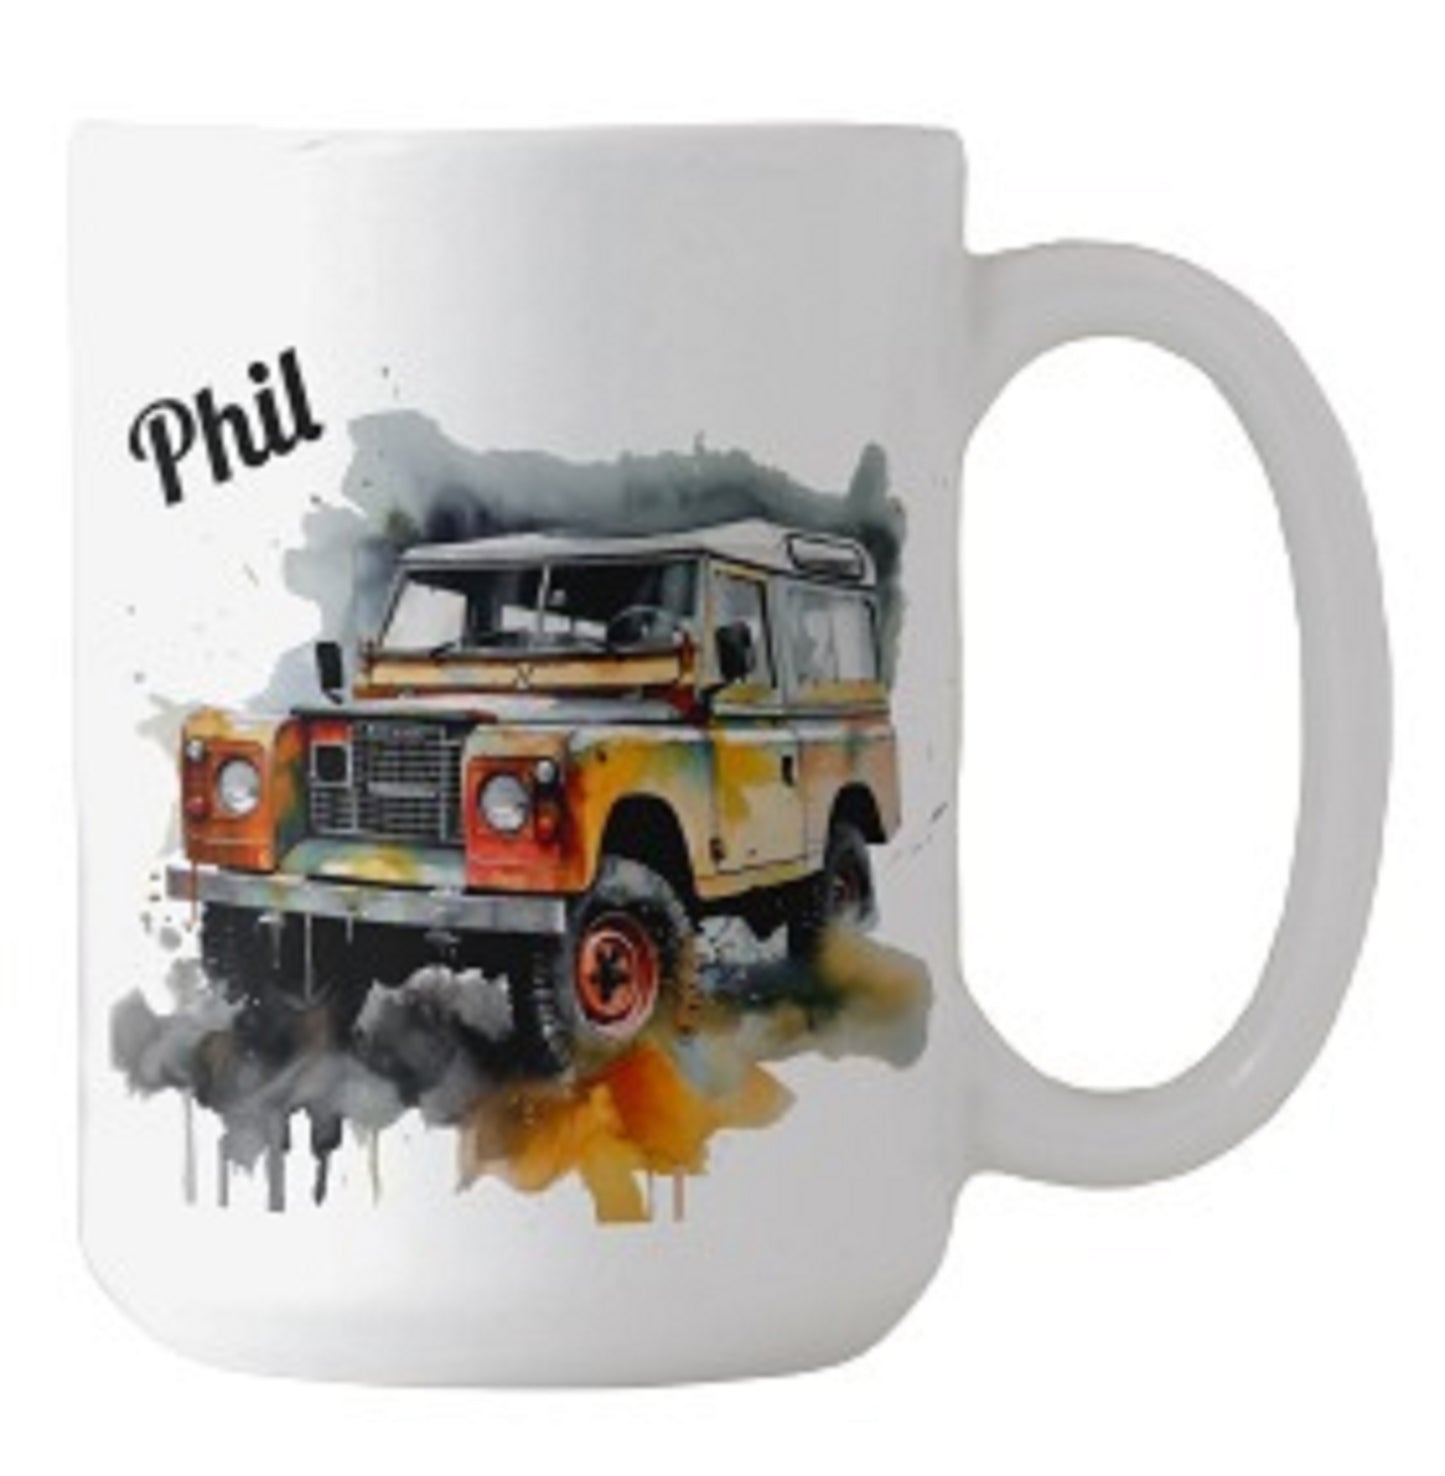  Personalised Classic Land Rover Coffee Mug - Unique Design by Free Spirit Accessories sold by Free Spirit Accessories